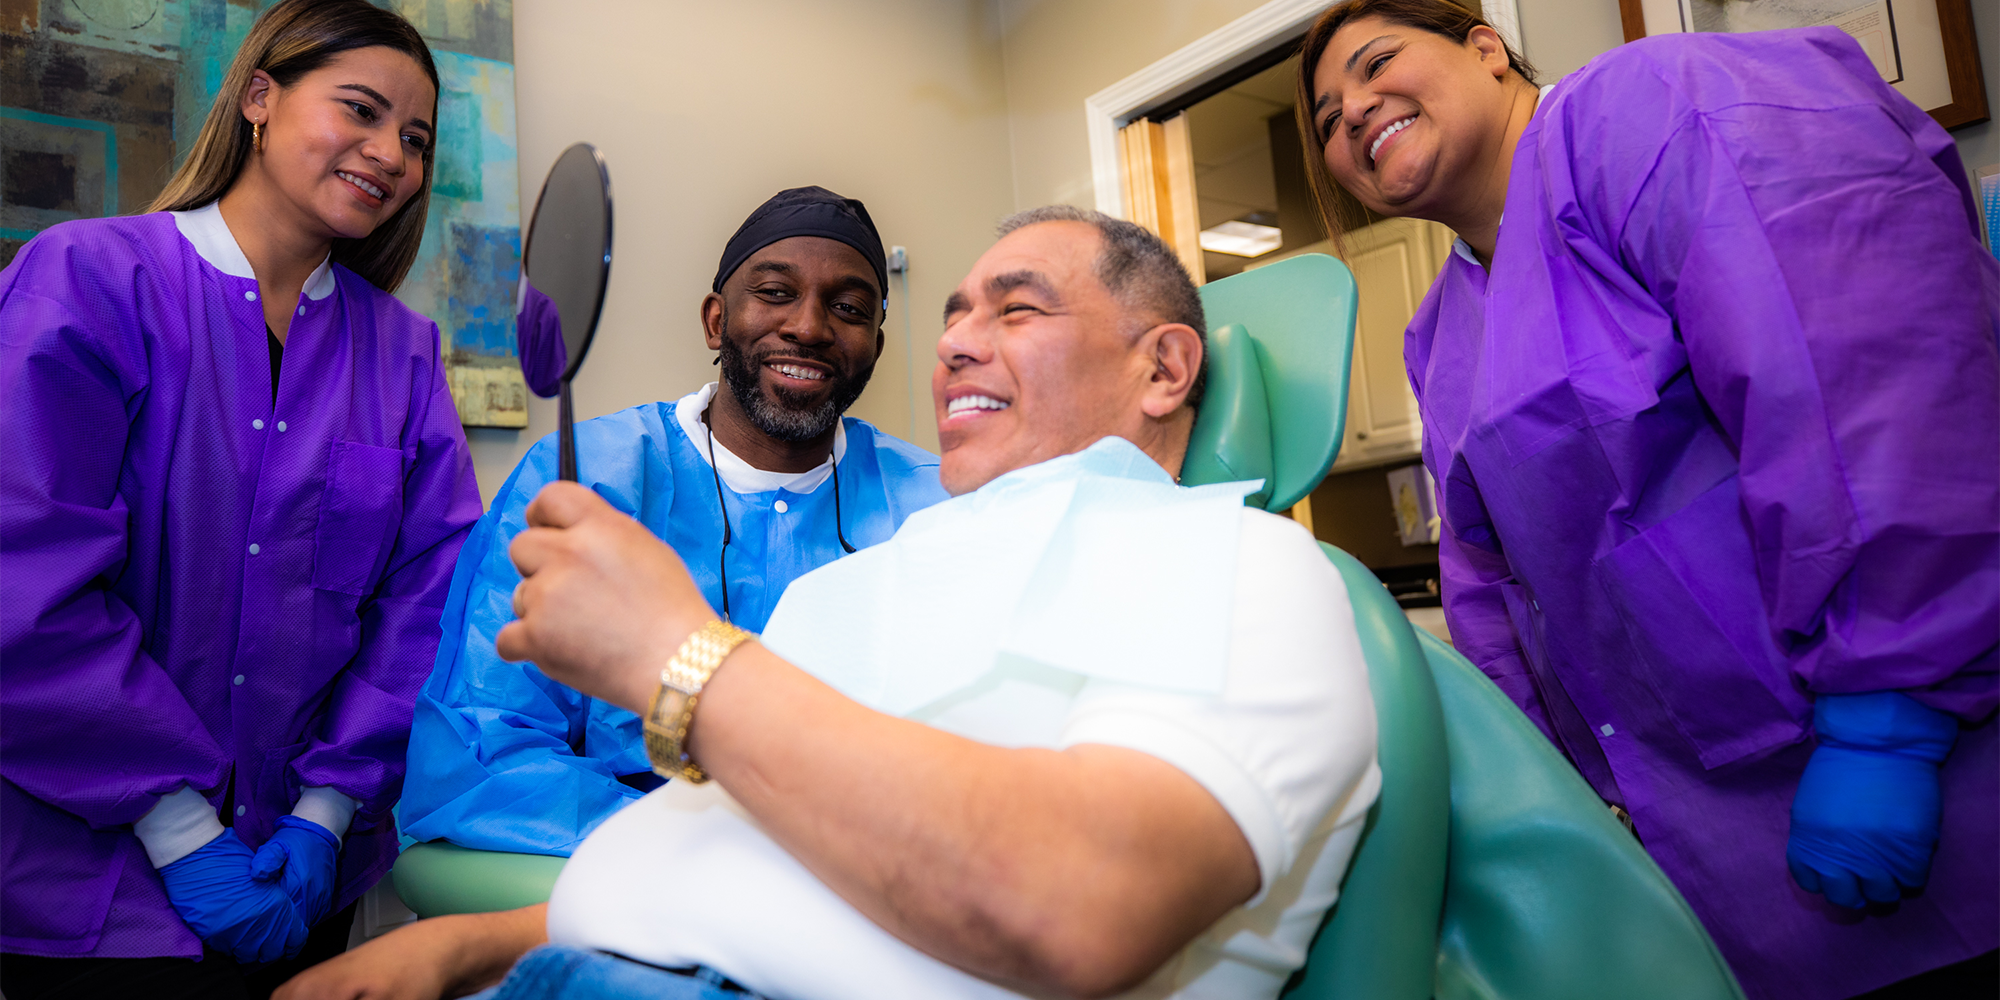 patient smiling confidently after their dental procedure